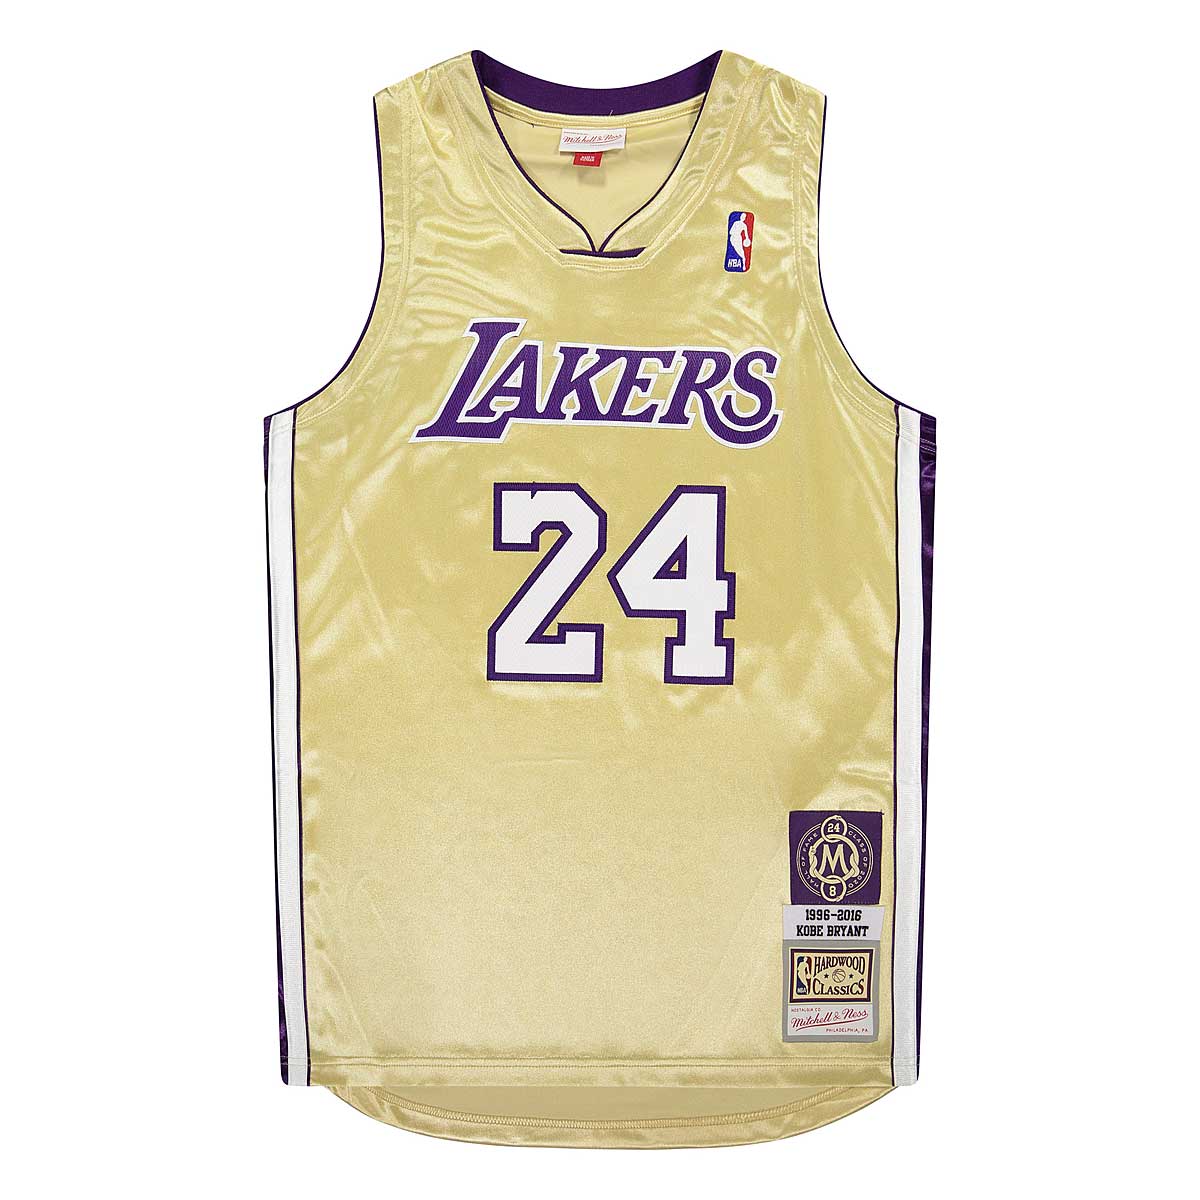 Buy NBA AUTHENTIC HALL OF FAME JERSEY LOS ANGELES LAKERS - K.BRYANT for N/A  0.0 on !